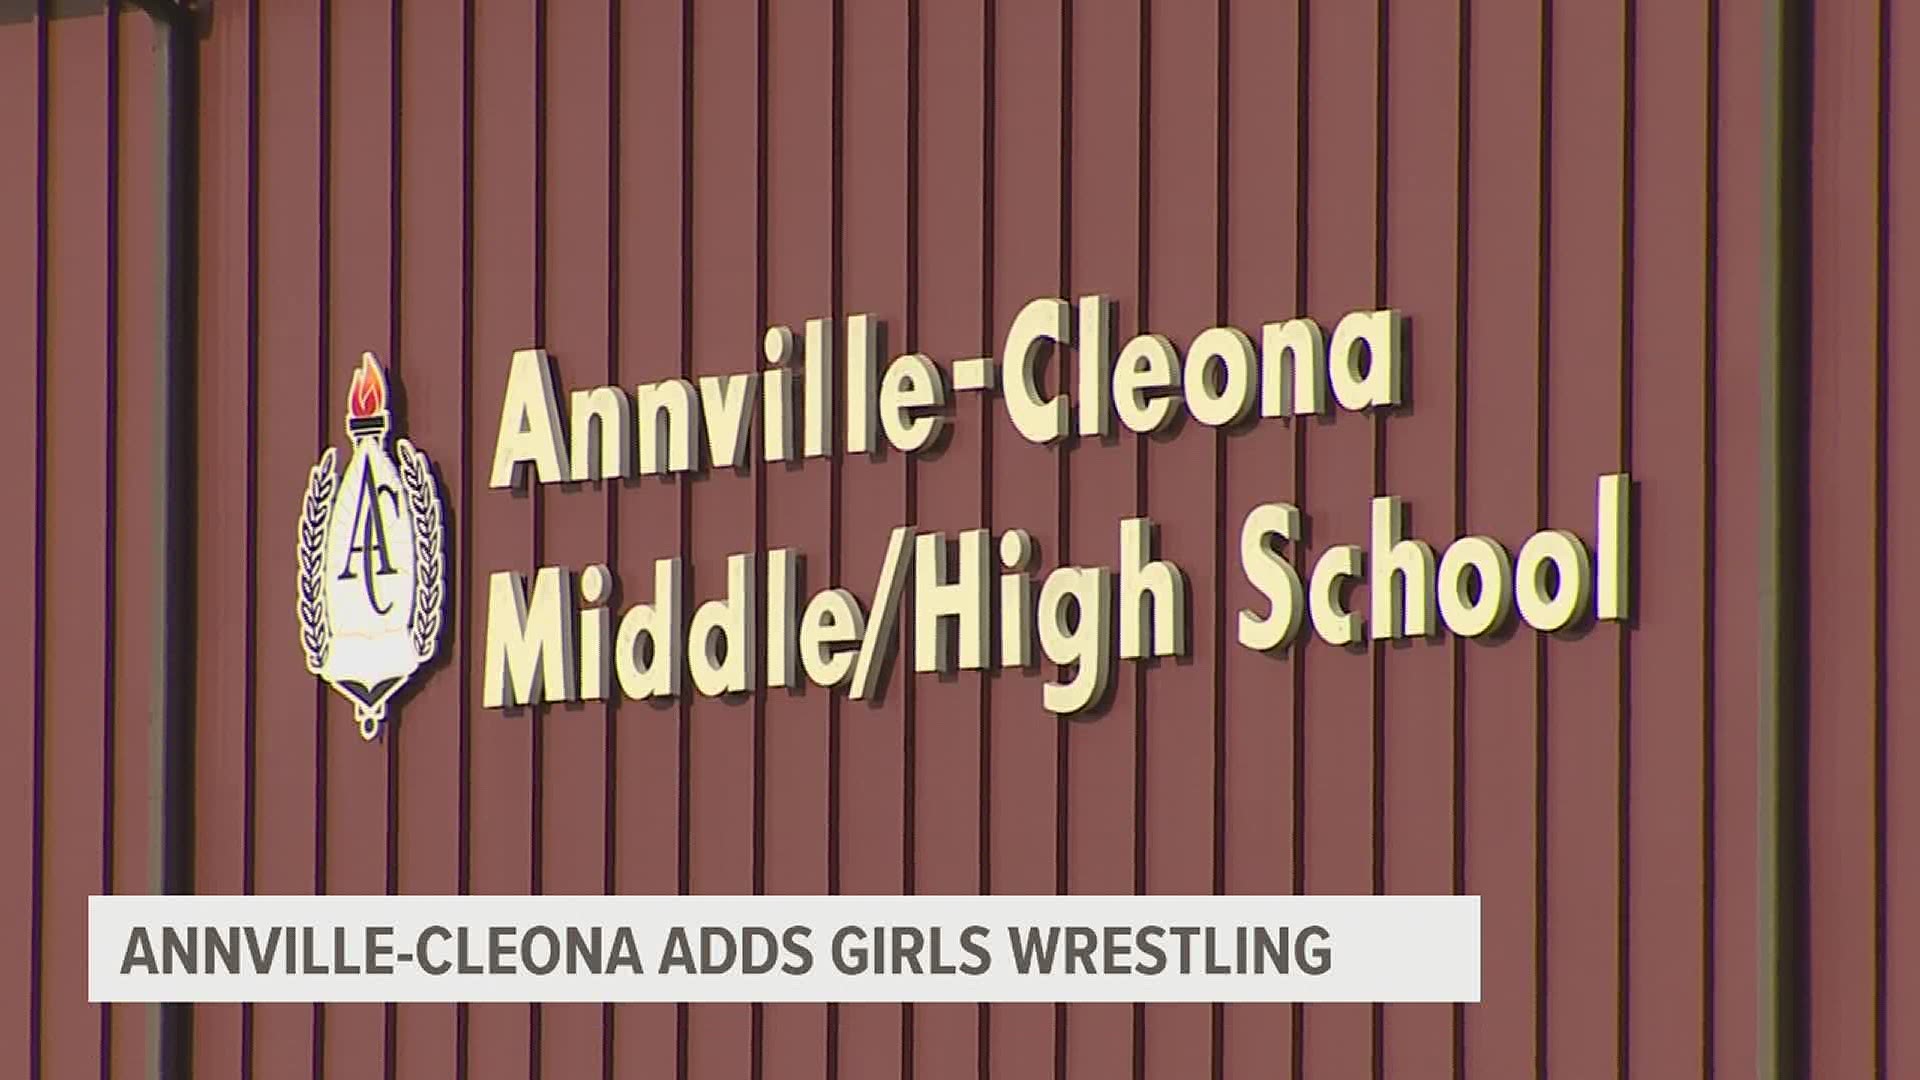 Annville-Cleona becomes the seventh high school girls wrestling team in Pennsylvania.